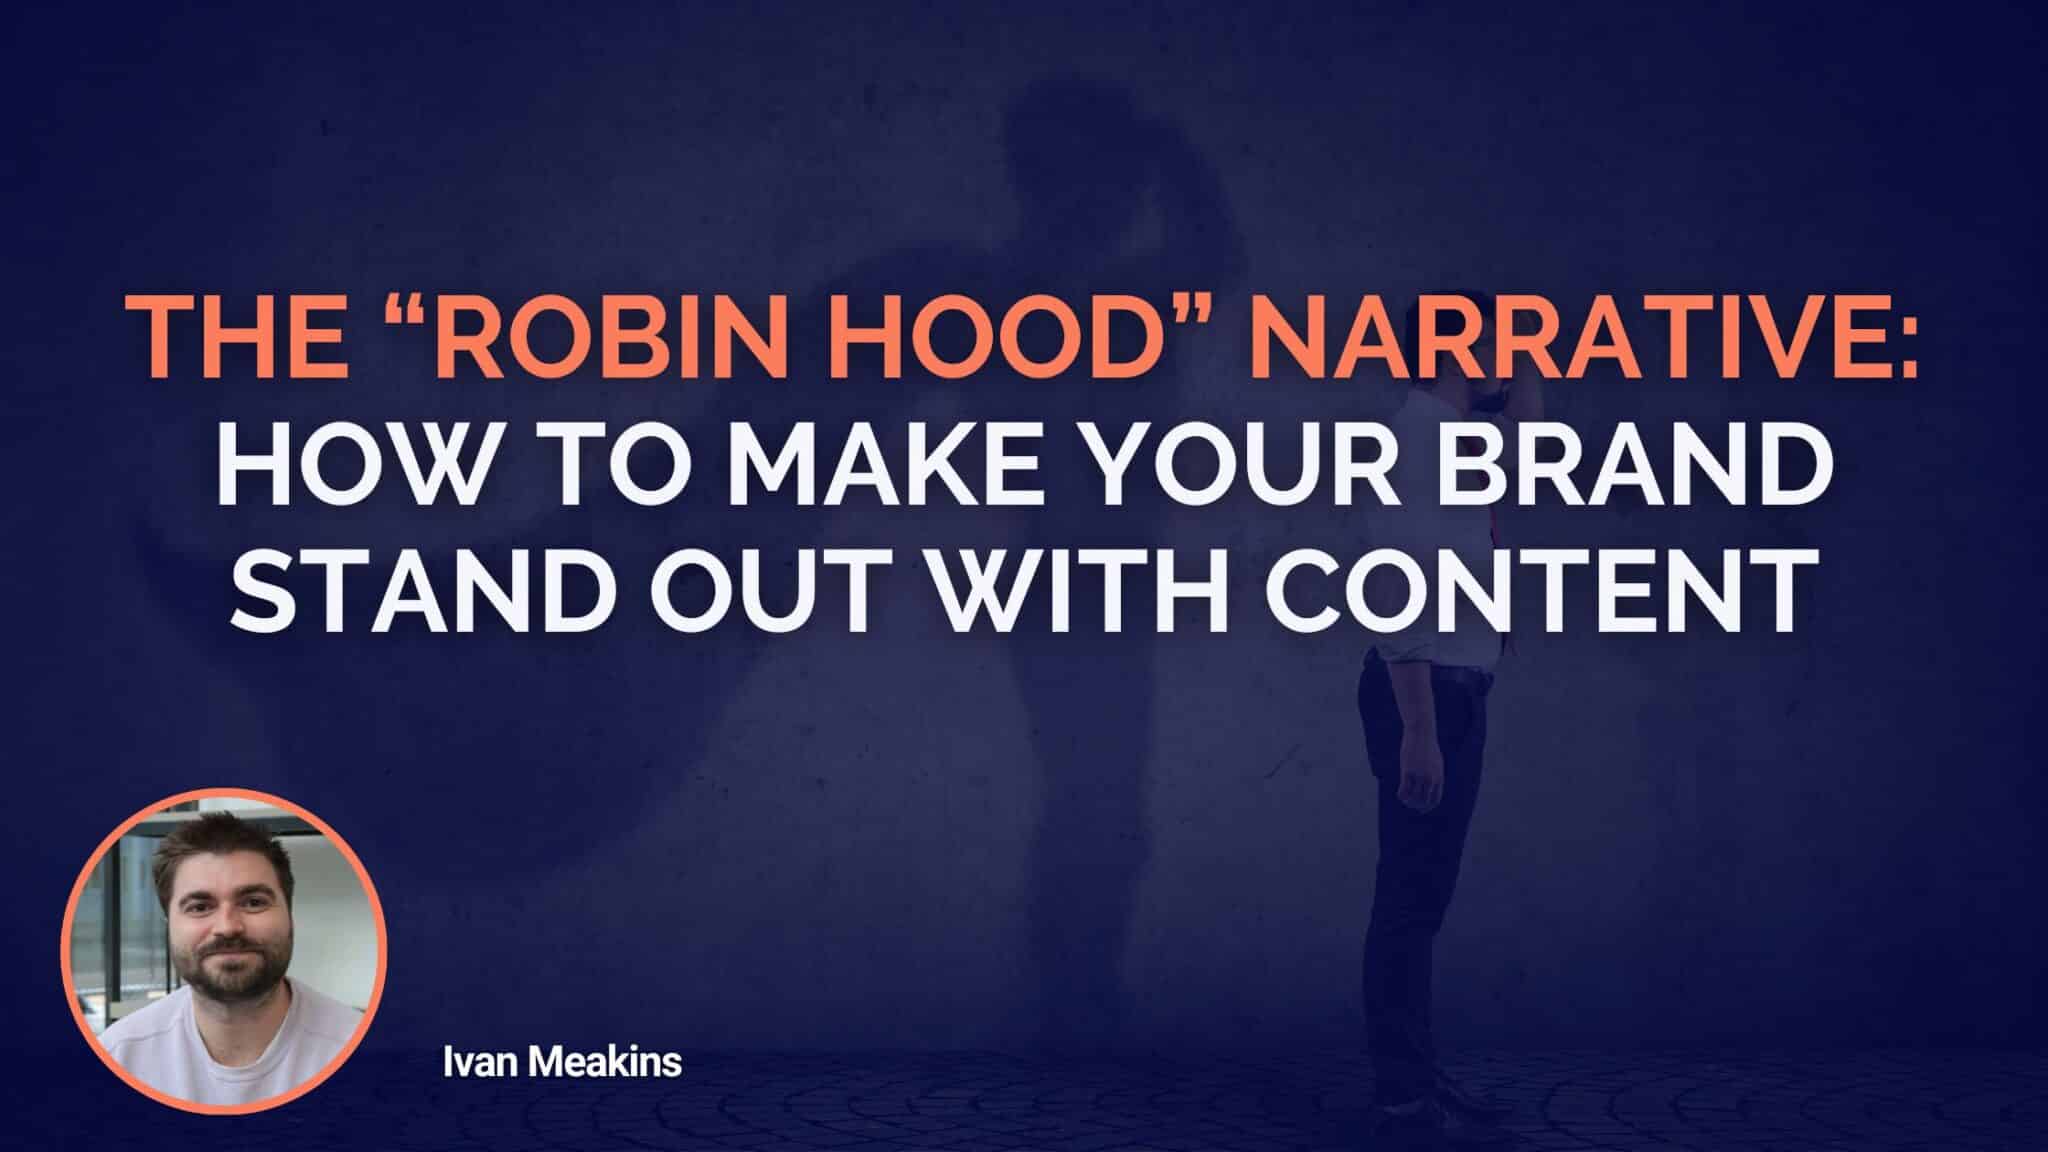 The “Robin Hood” Narrative: How To Make Your Brand Stand Out With Content